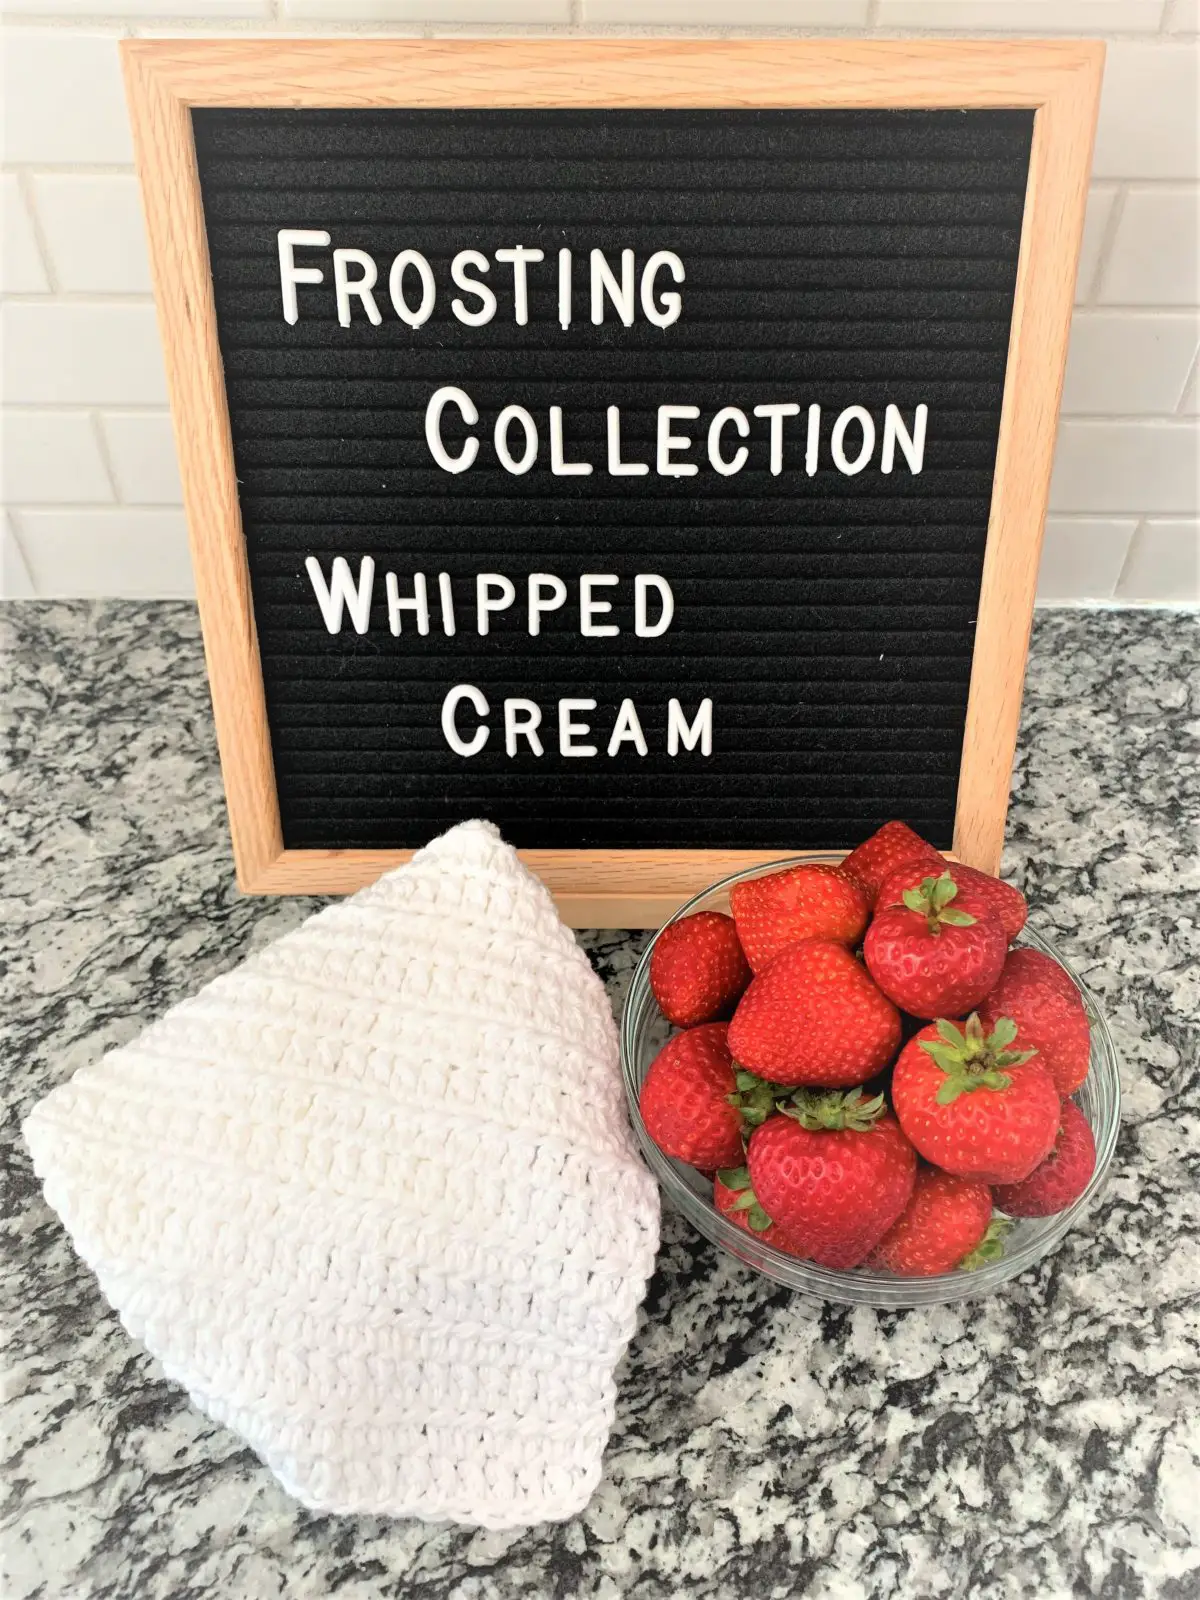 Free Crochet Dishcloth Pattern – Frosting Collection – Whipped Cream – Part 5